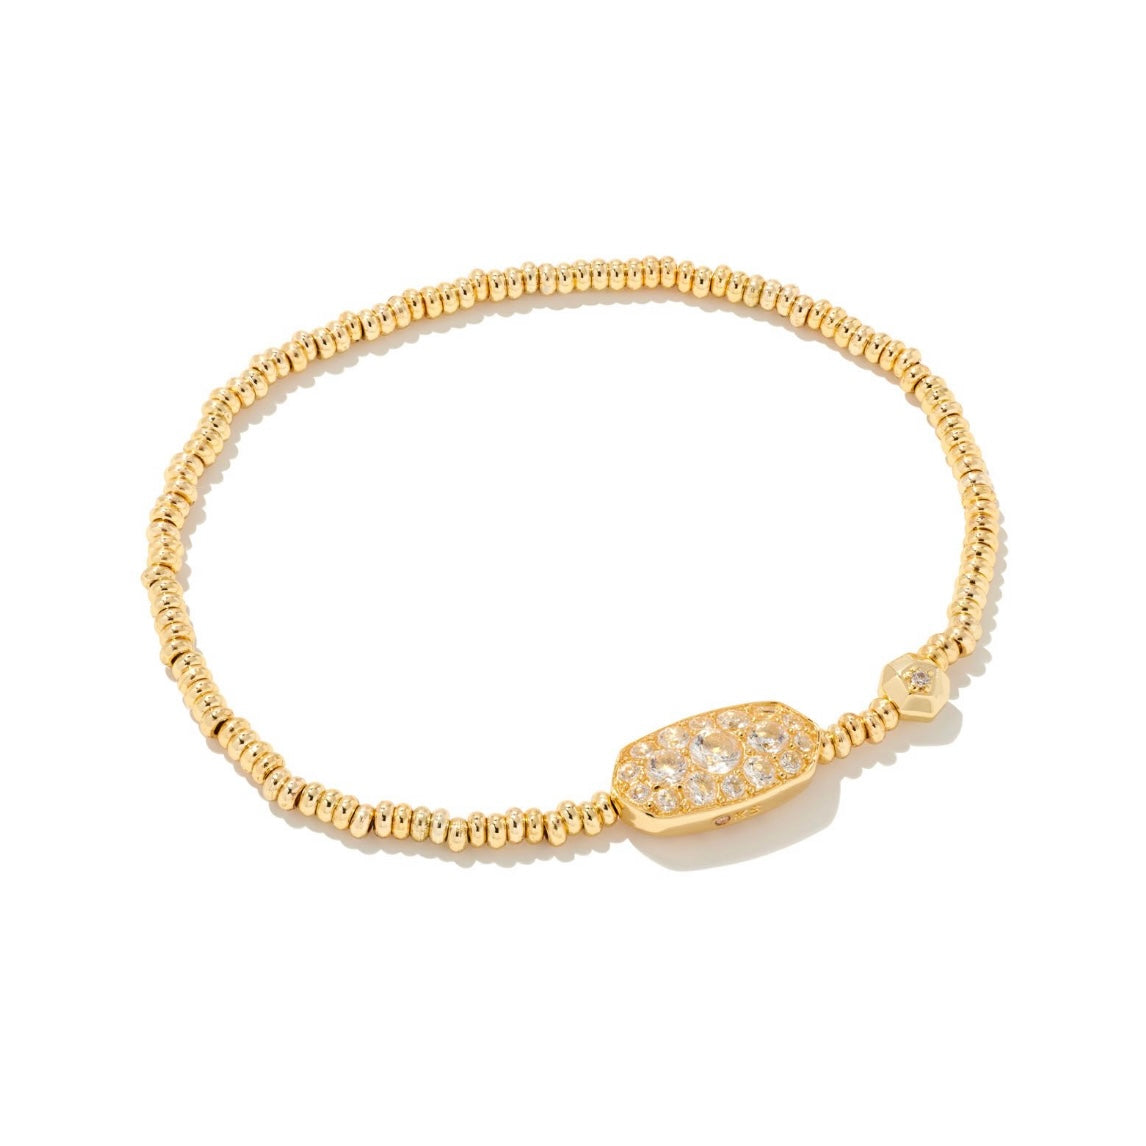 KENDRA SCOTT Grayson Gold Crystal Stretch Bracelet in White Crystal - The Street Boutique 